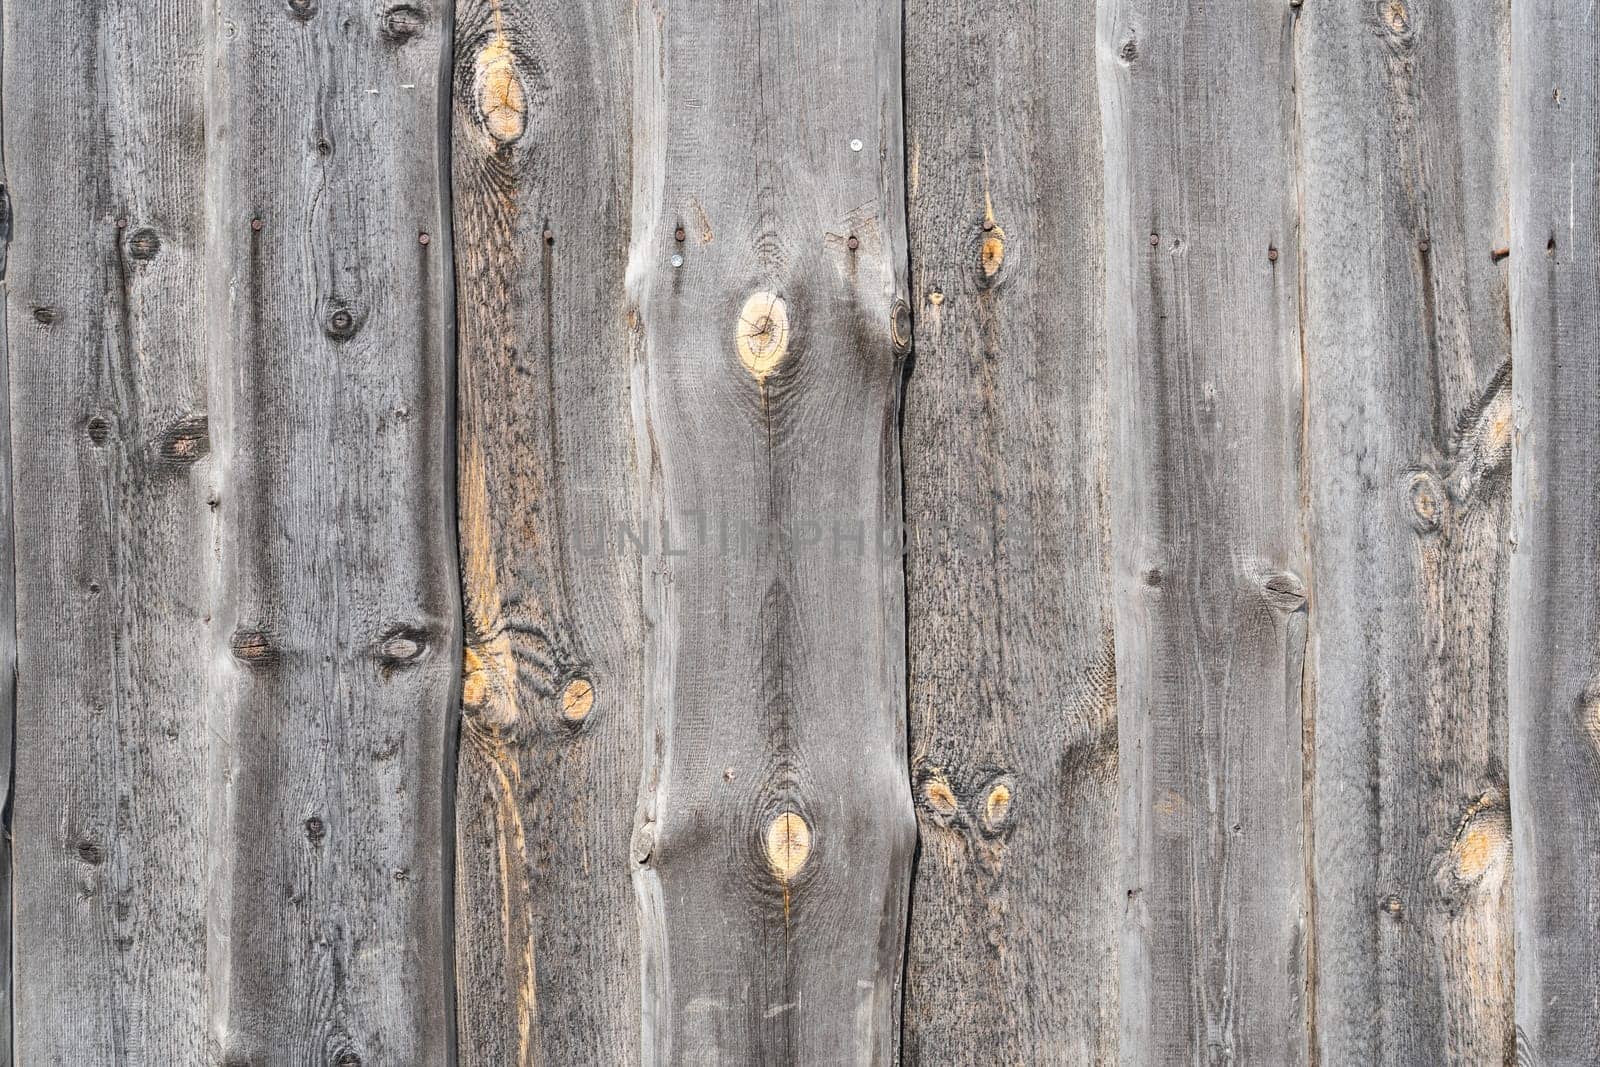 Wooden barn wall made of boards. by DovidPro